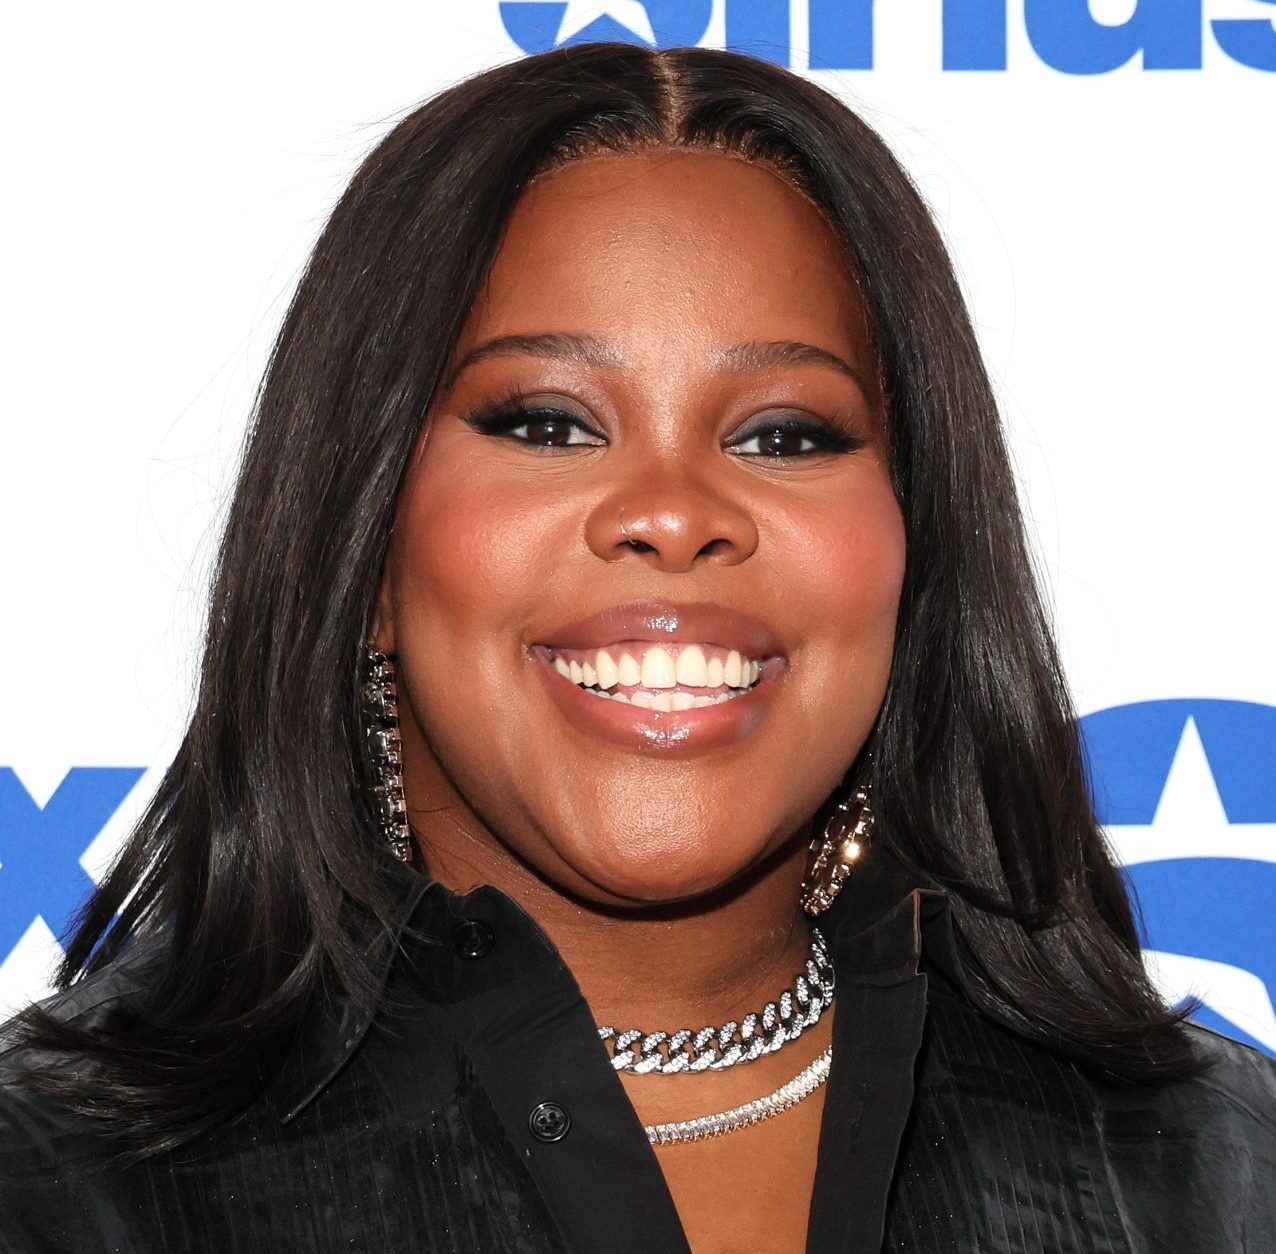 Amber Riley reveals why she turned down a sex scene "delighted"